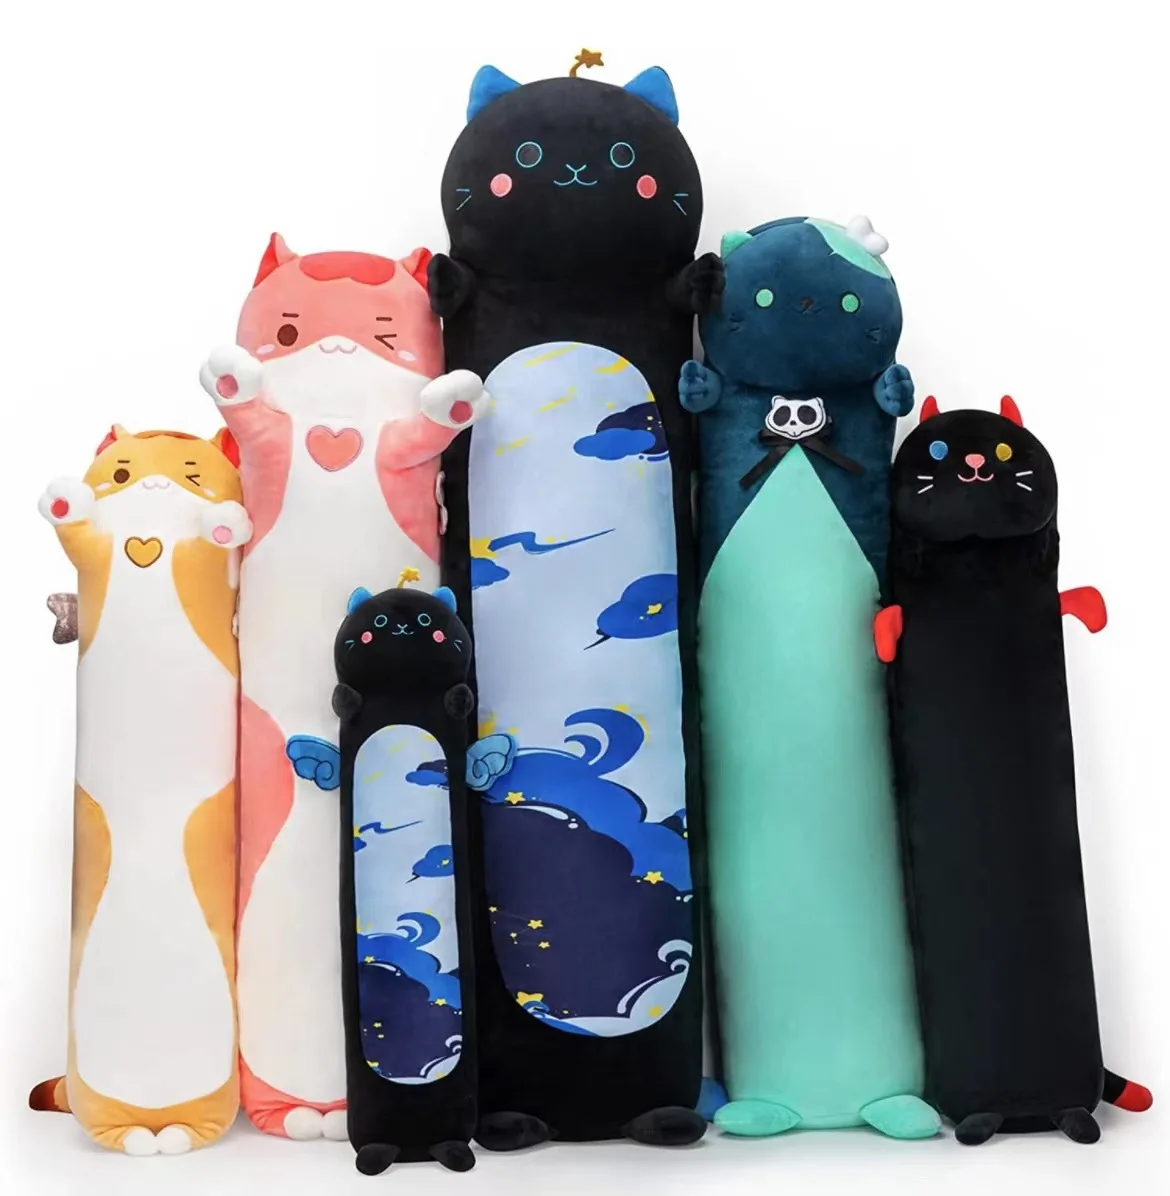 New Cute Soft Long Cat Pillow Plush Toys Stuffed Pause Office Nap Pillow Bed Sleep Pillow Home Decor Gift Doll for Kids Girl